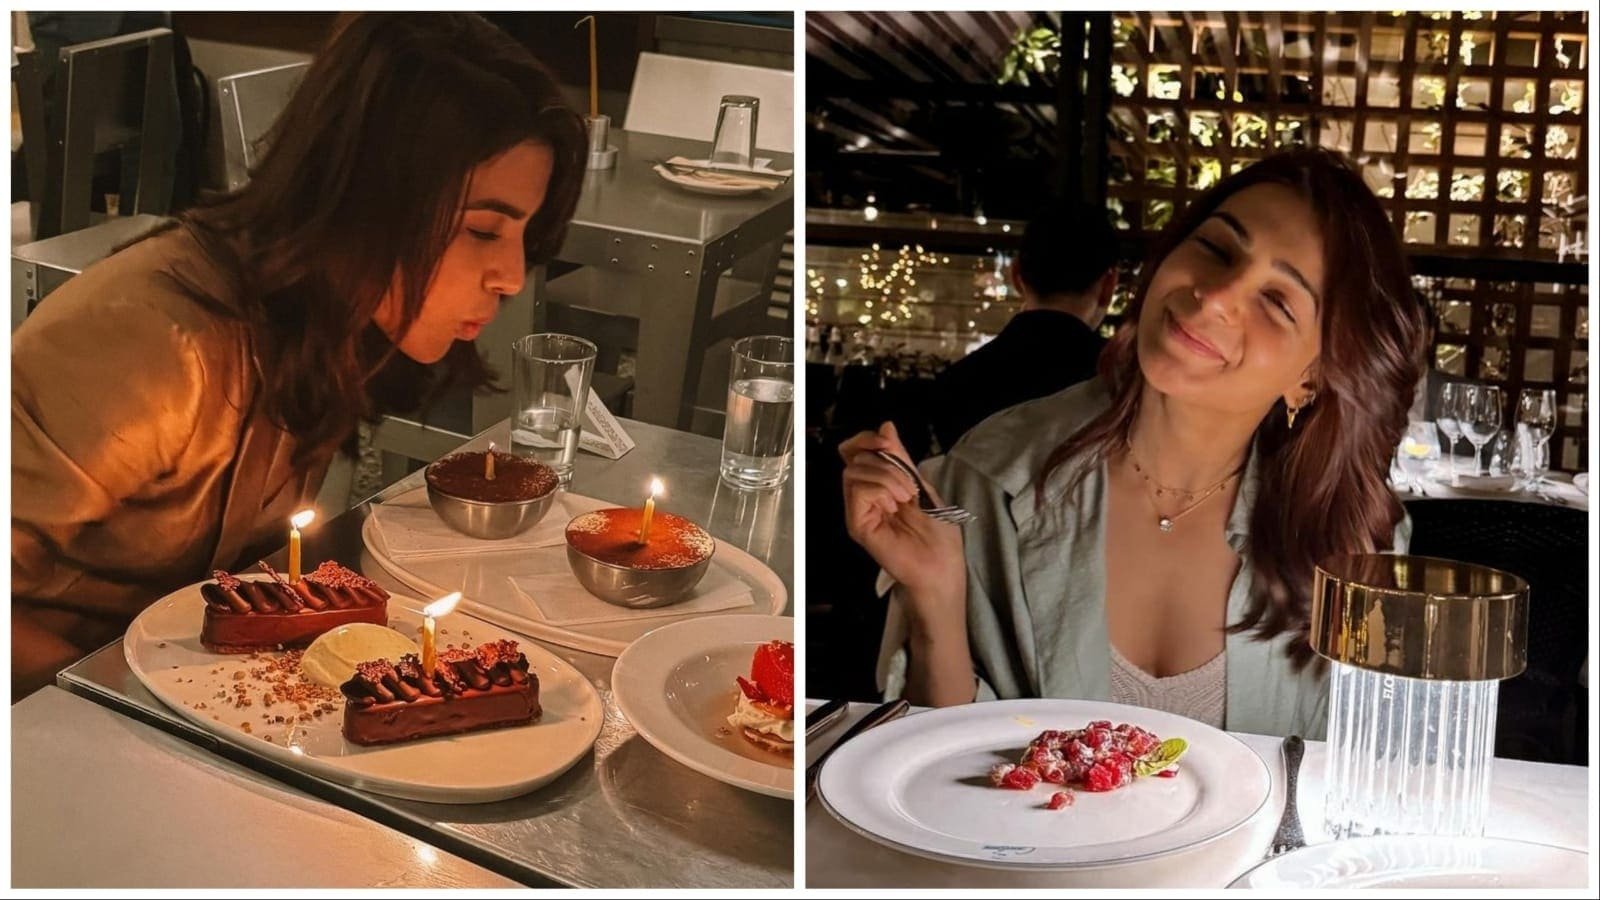 Samantha Ruth Prabhu went on a special trip to Greece for her birthday. She had a great time exploring new places and trying delicious local food.